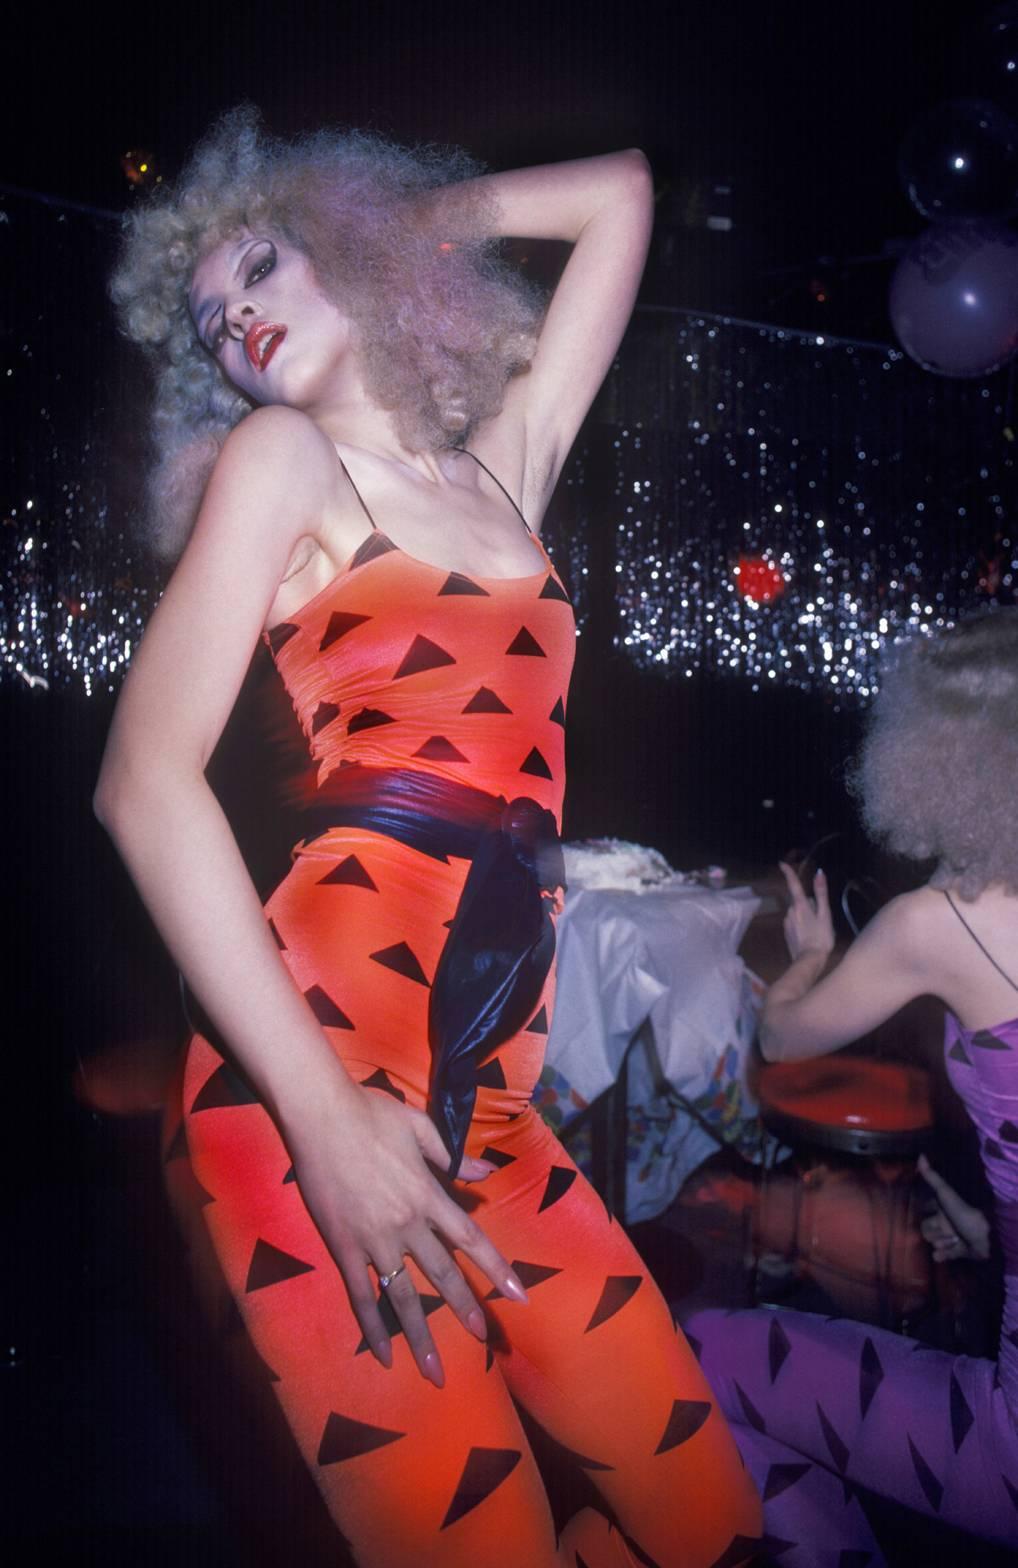 Waring Abbott Color Photograph - 'At Electric Circus' ( C type Print )